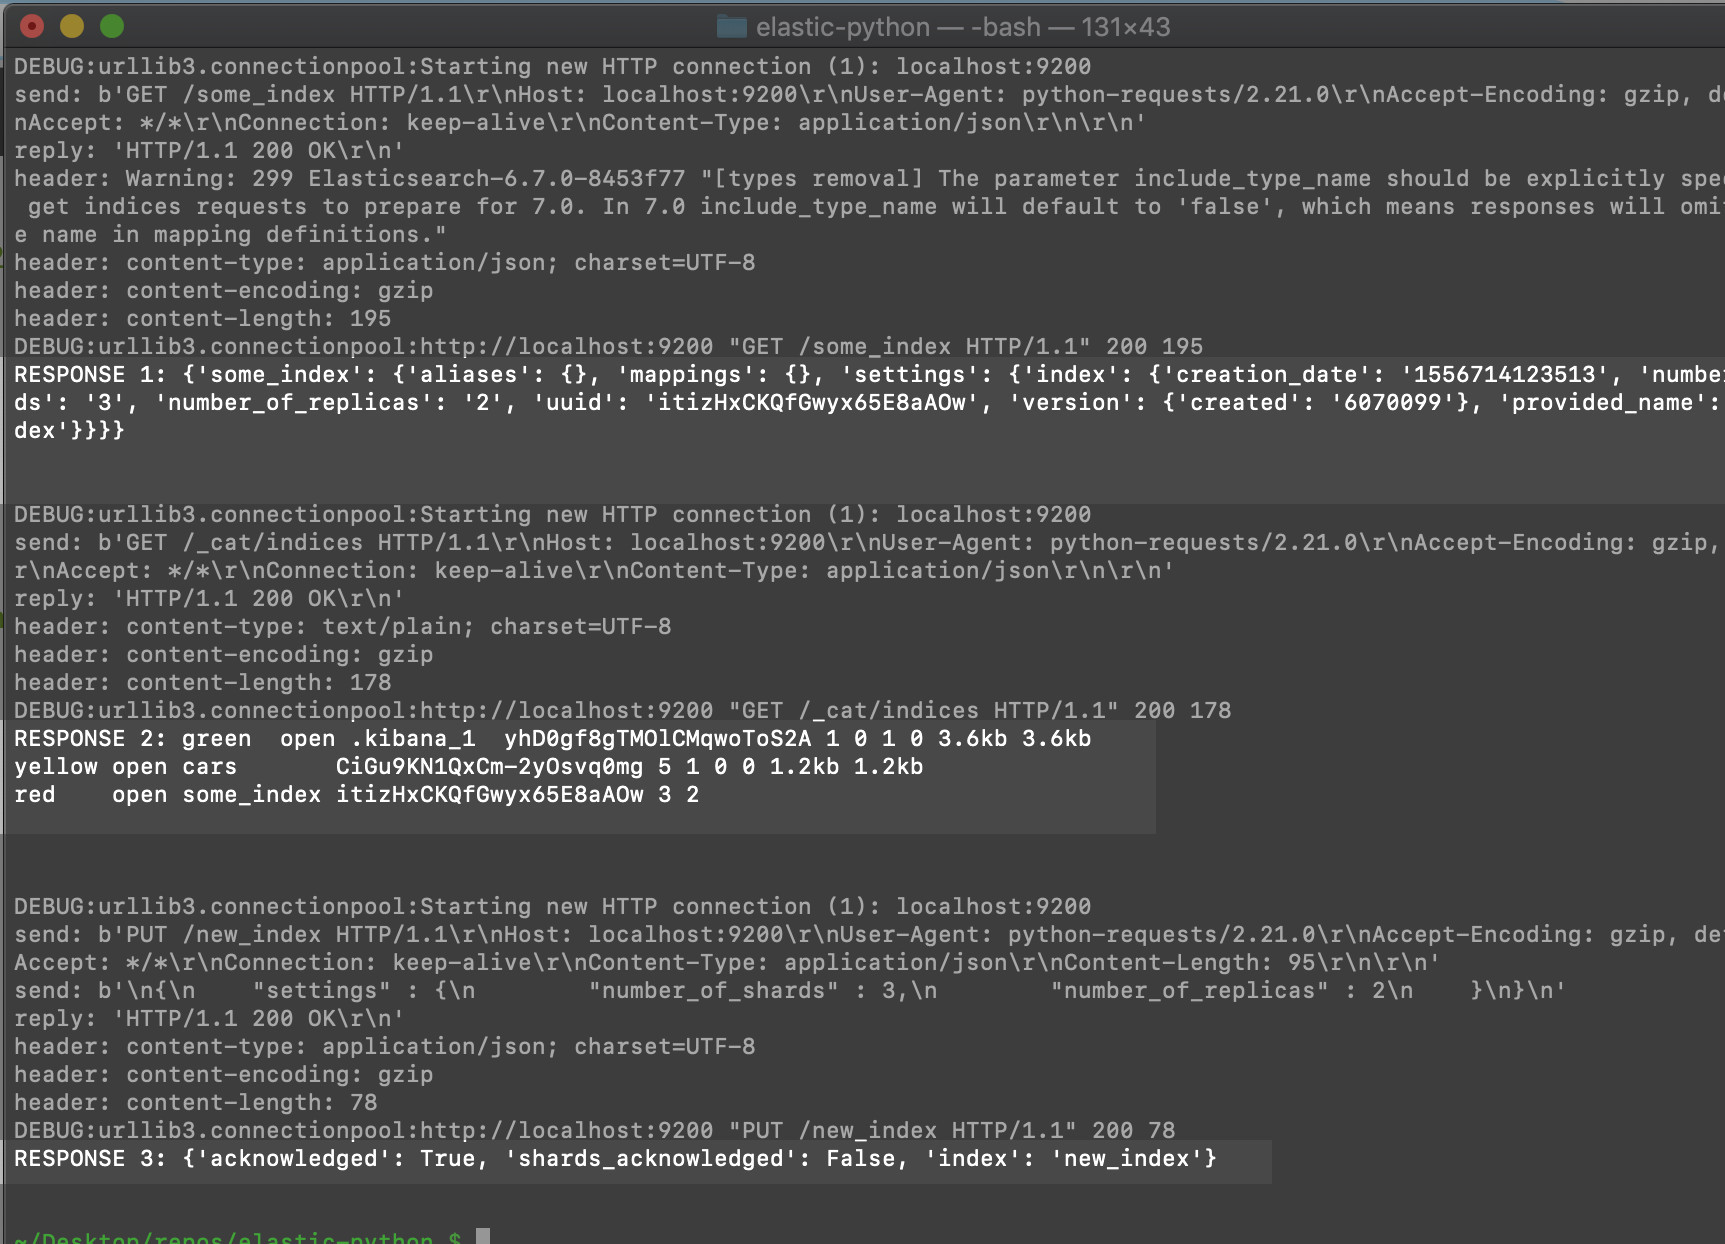 Screenshot of a terminal output of HTTP responses from the calls made to the elasticsearch_curl() function